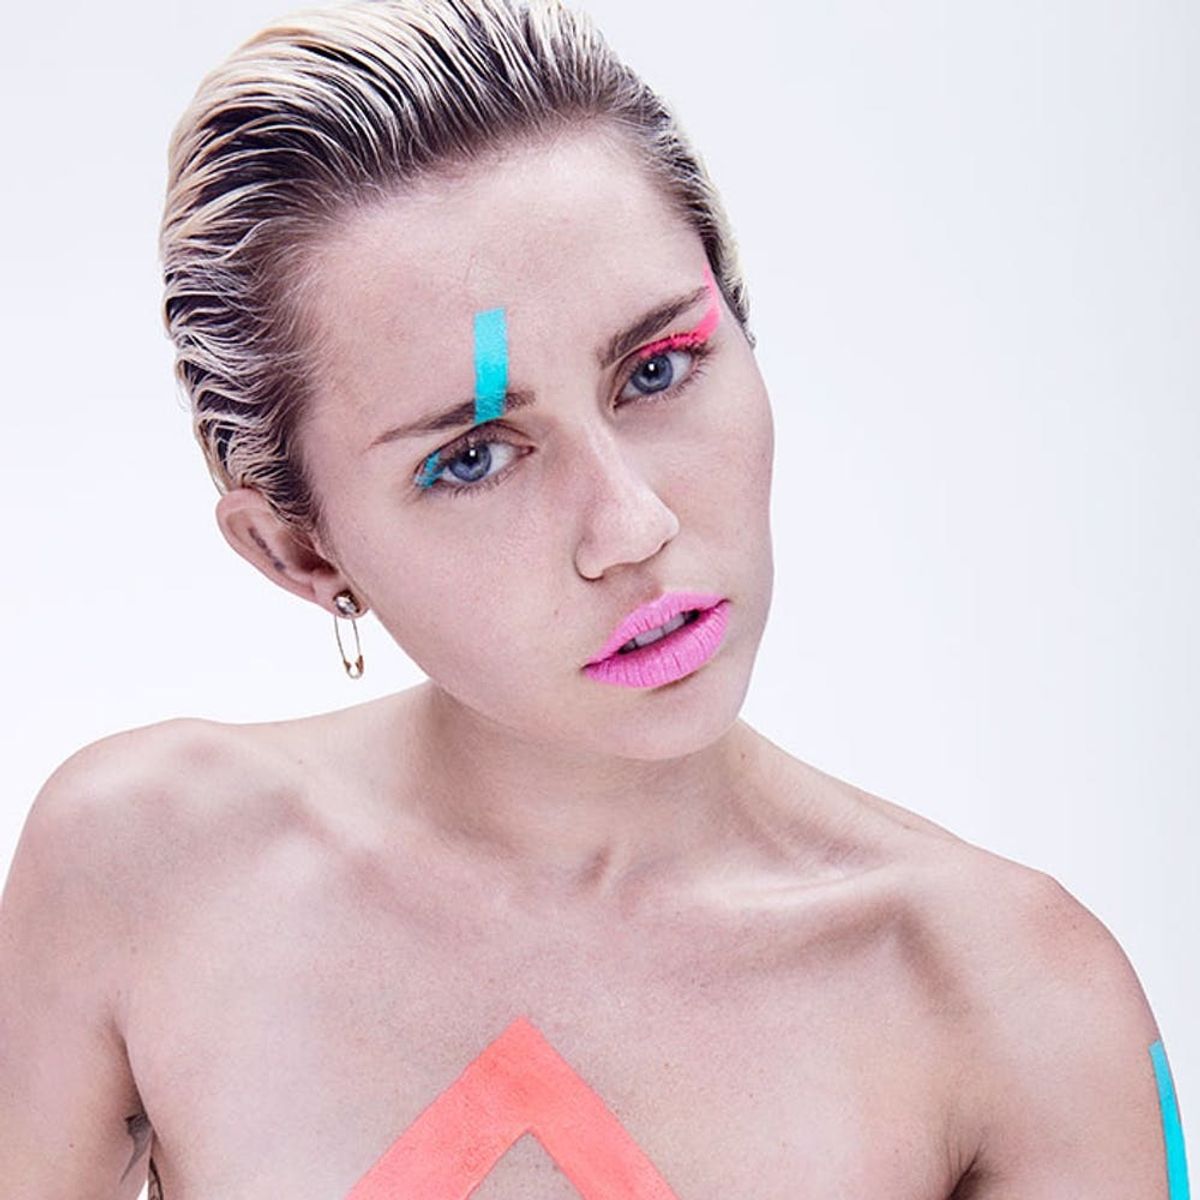 Miley Cyrus’ New Instagram Campaign Will Leave You Seriously Inspired